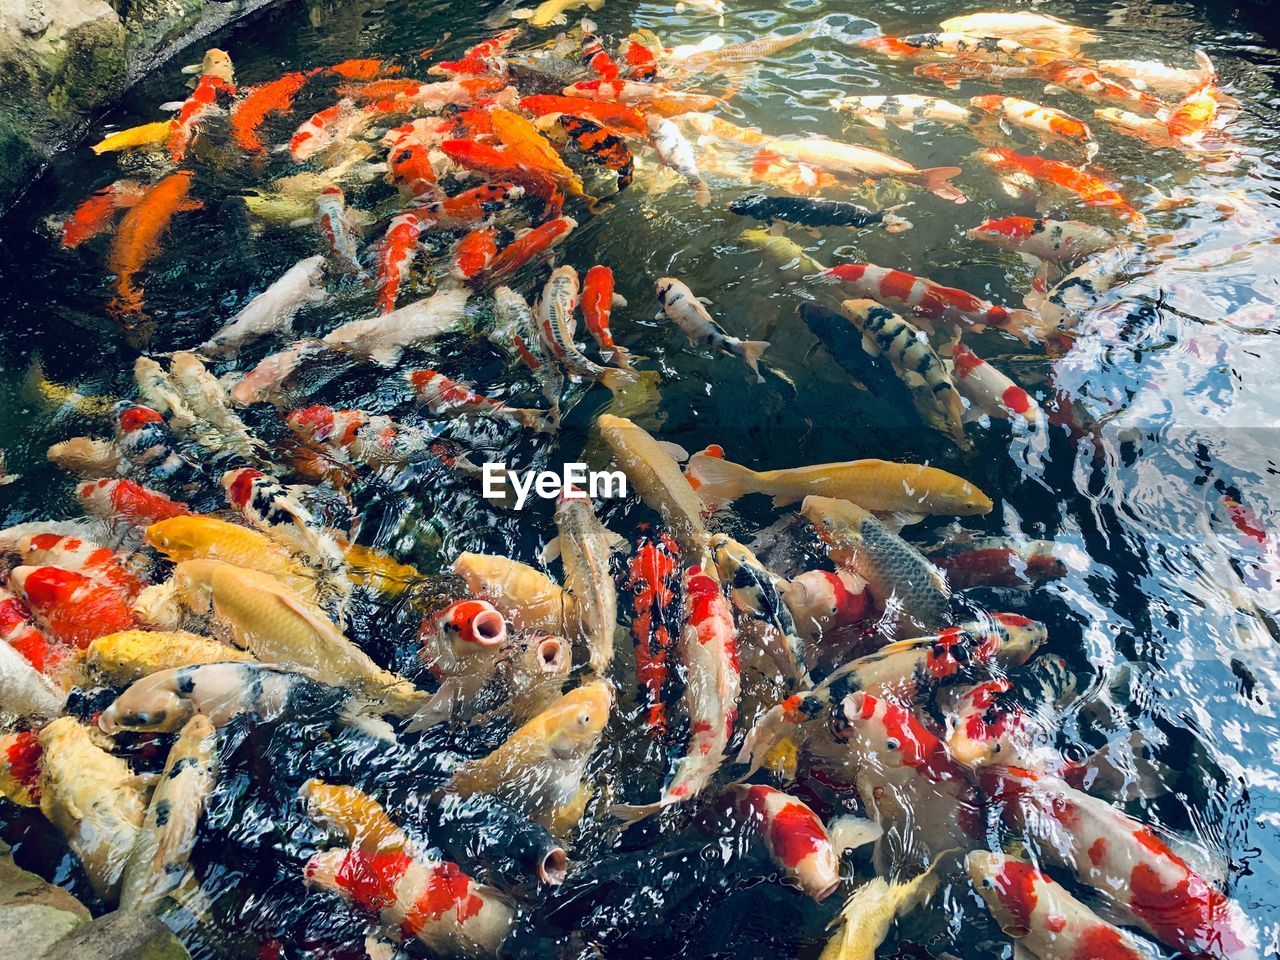 HIGH ANGLE VIEW OF KOI FISH IN POND